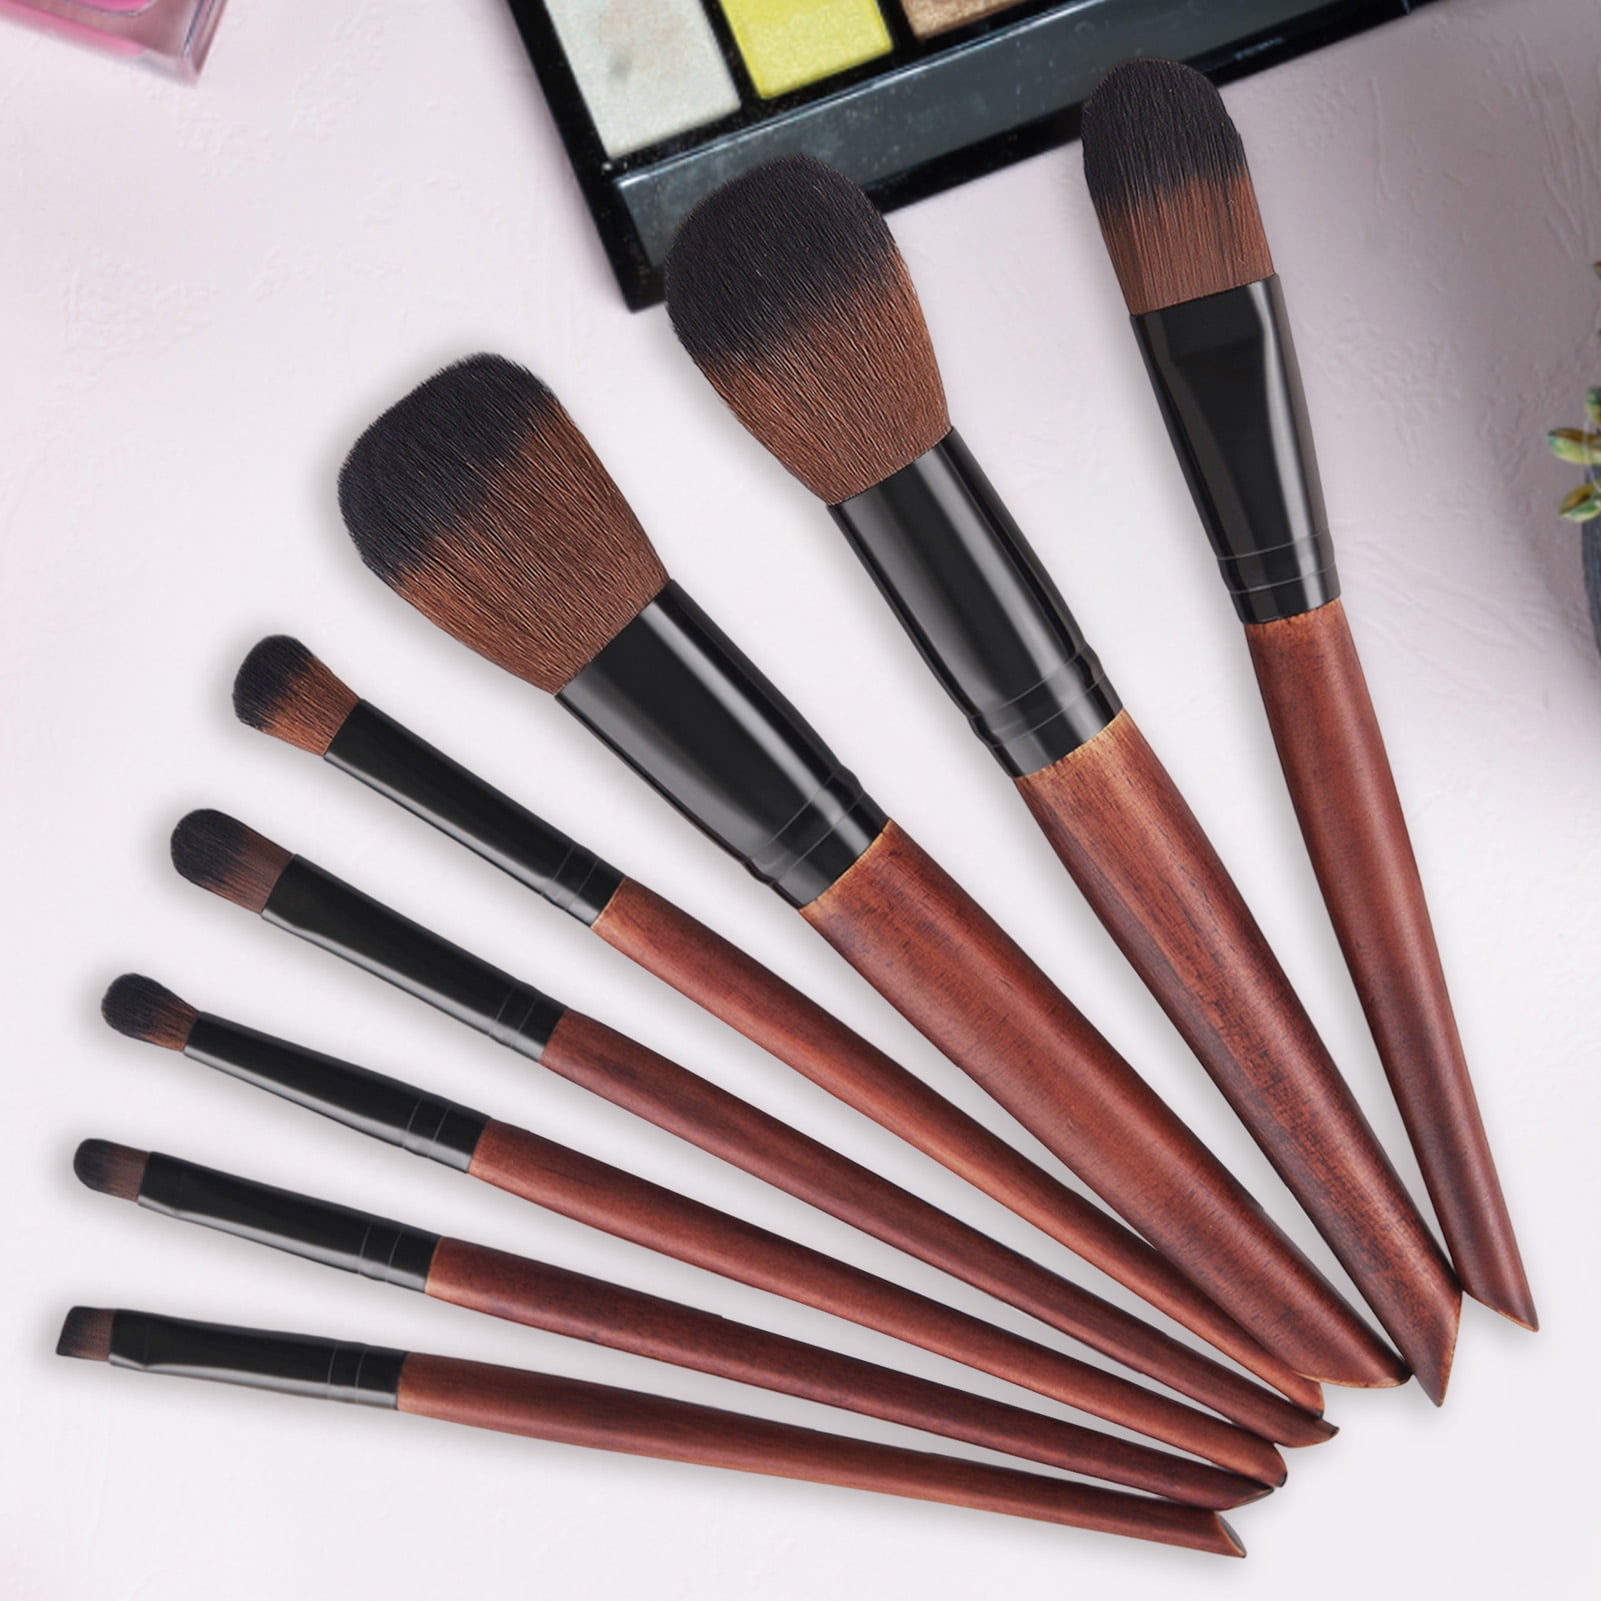 ZHAGHMIN Make Up Brushes Set Make Up Large Soft Beauty Powder Big Flame  Brush Foundation Cosmetic Tool Makeup Brushes for Teens Under 13 Brush Hair